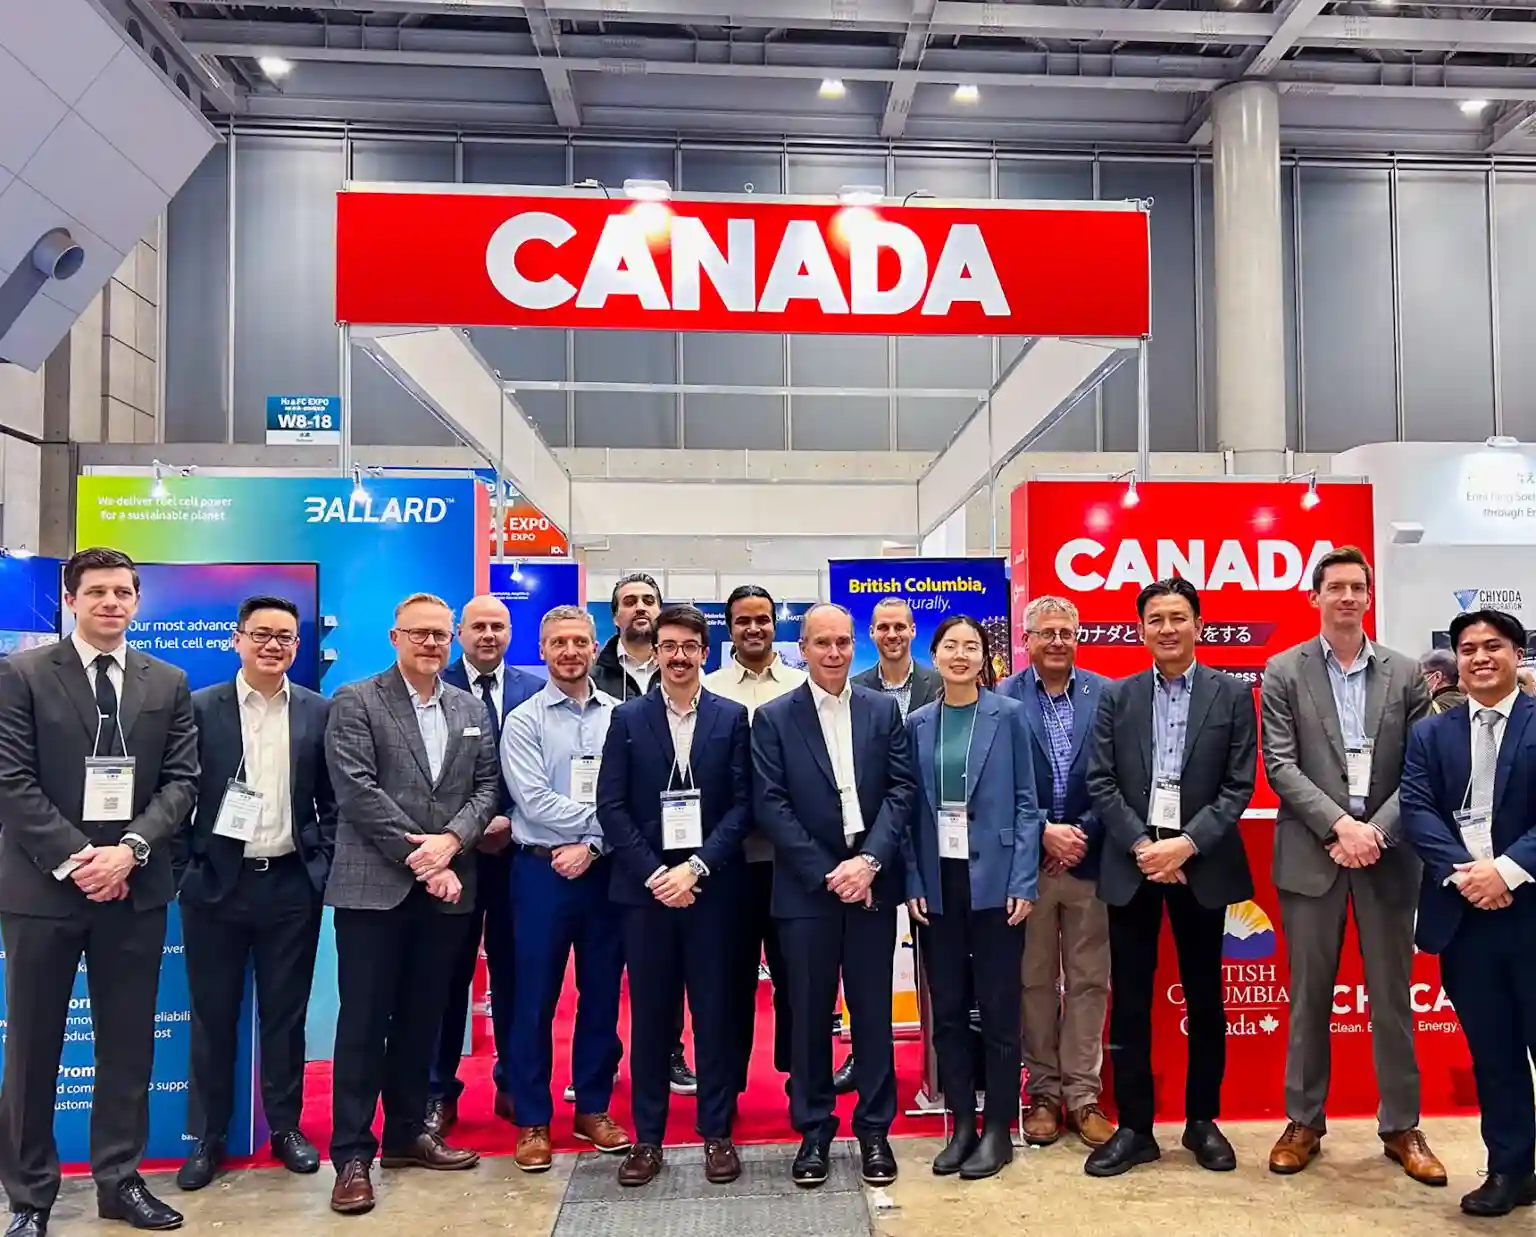 Group of people posing in front of a "canada" booth at a trade show, with various company logos and promotional materials visible.